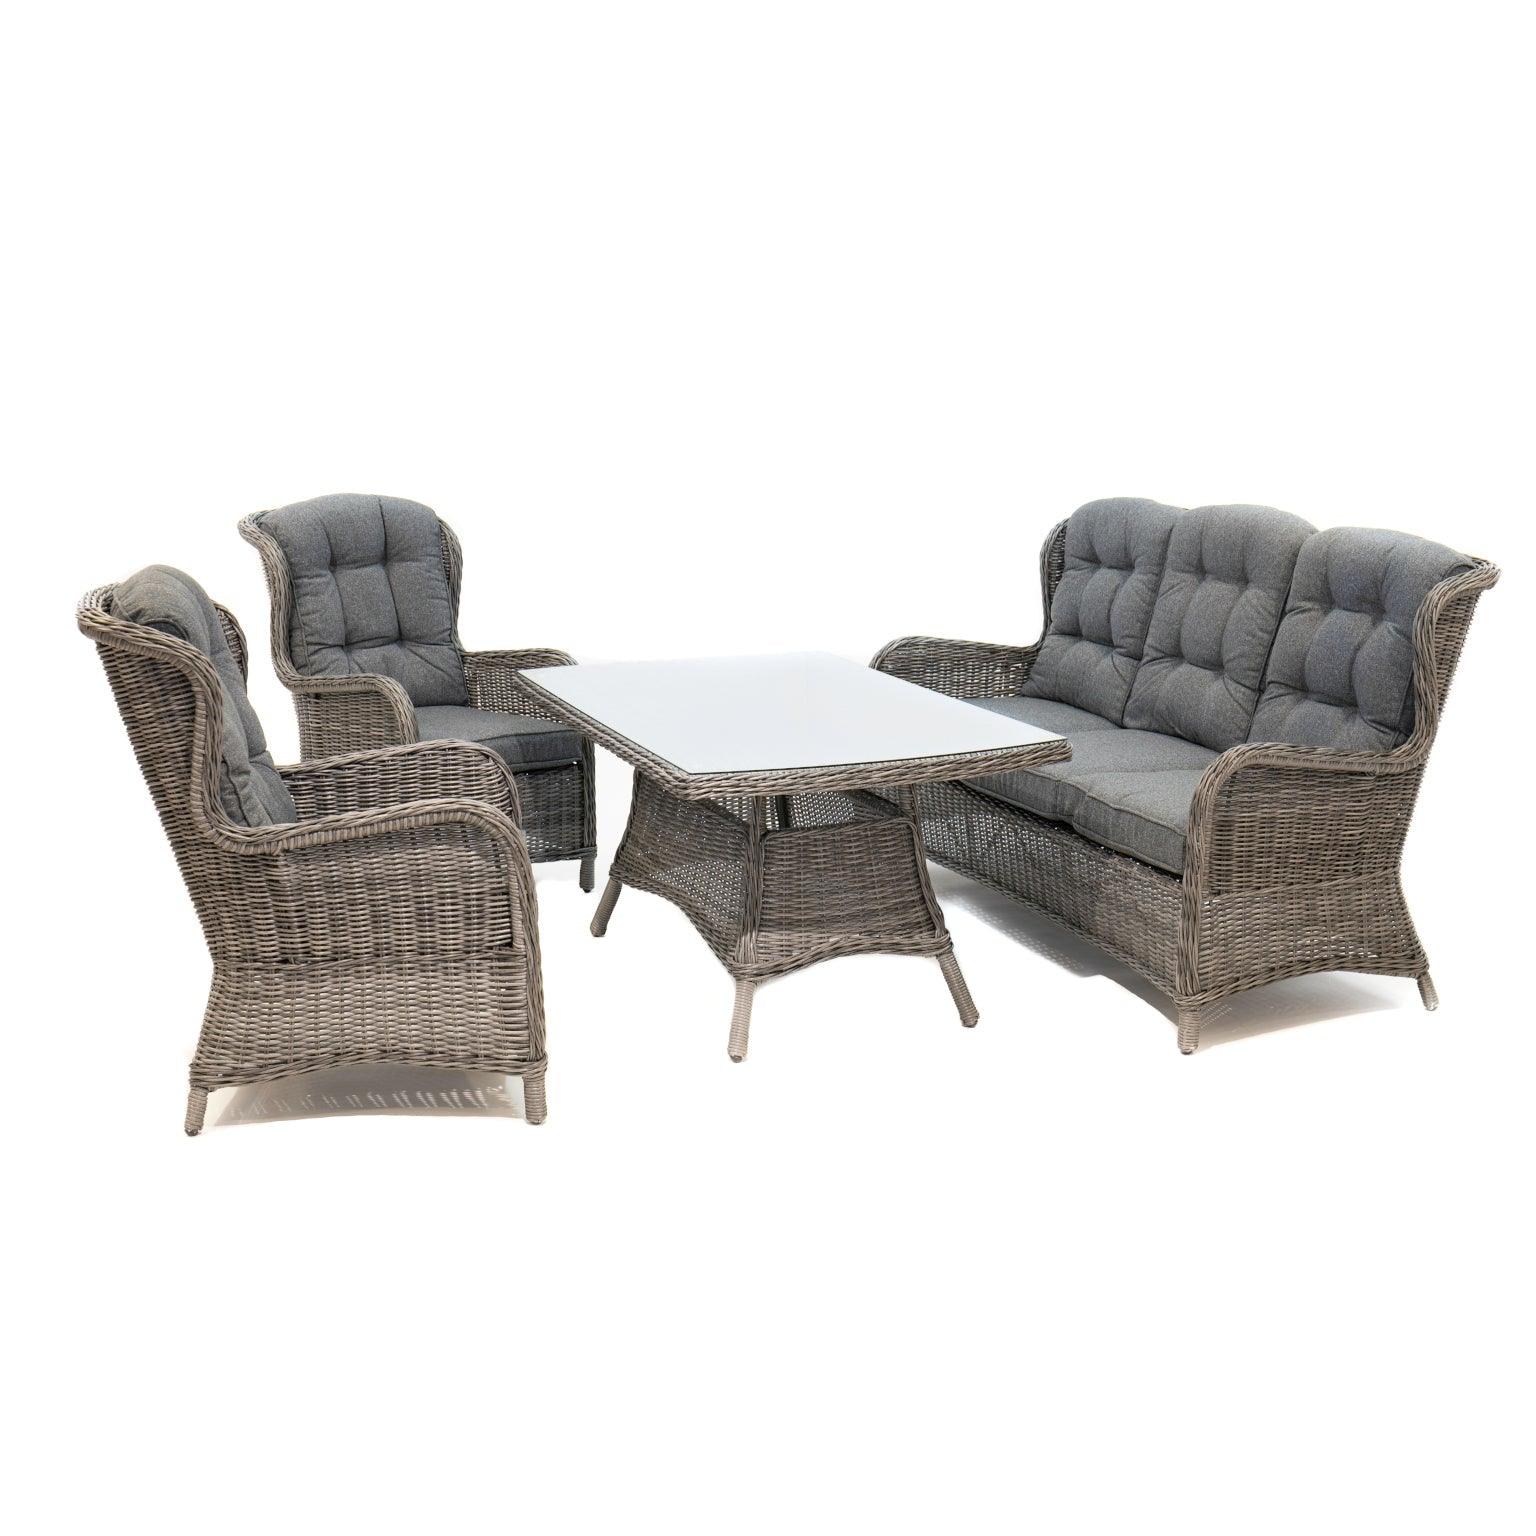 This Rio four Piece Deep Seating Set includes a sofa, two chairs, and a table, all with Driftwood-hued resin wicker and Light Brown cushions for optimum comfort and lasting style.